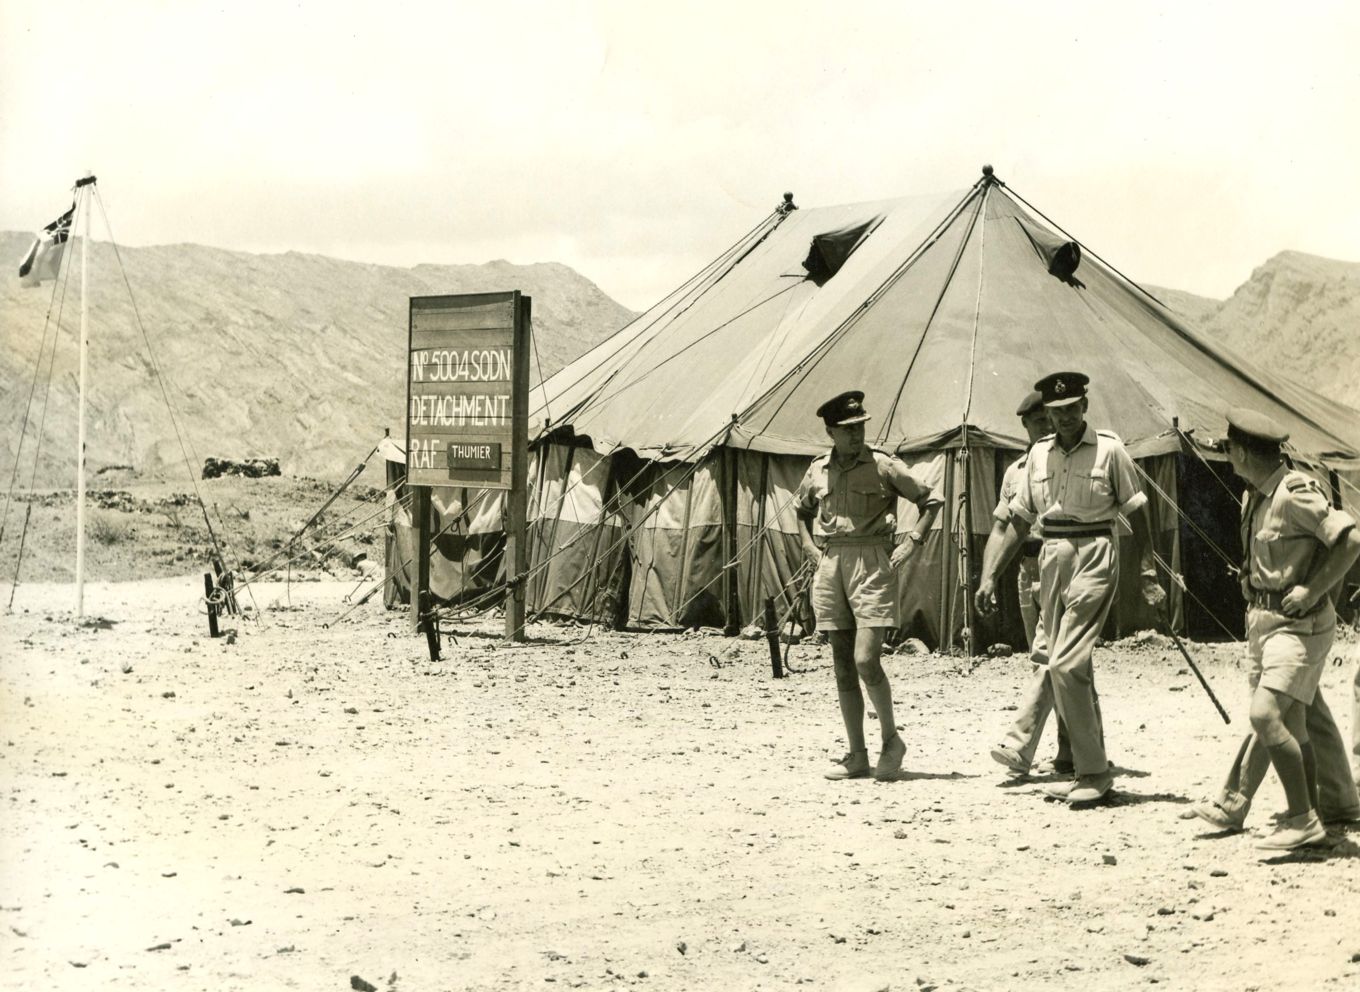 Historical images showing the Airfield Construction Branch in action in the Middle East during the 1960’s